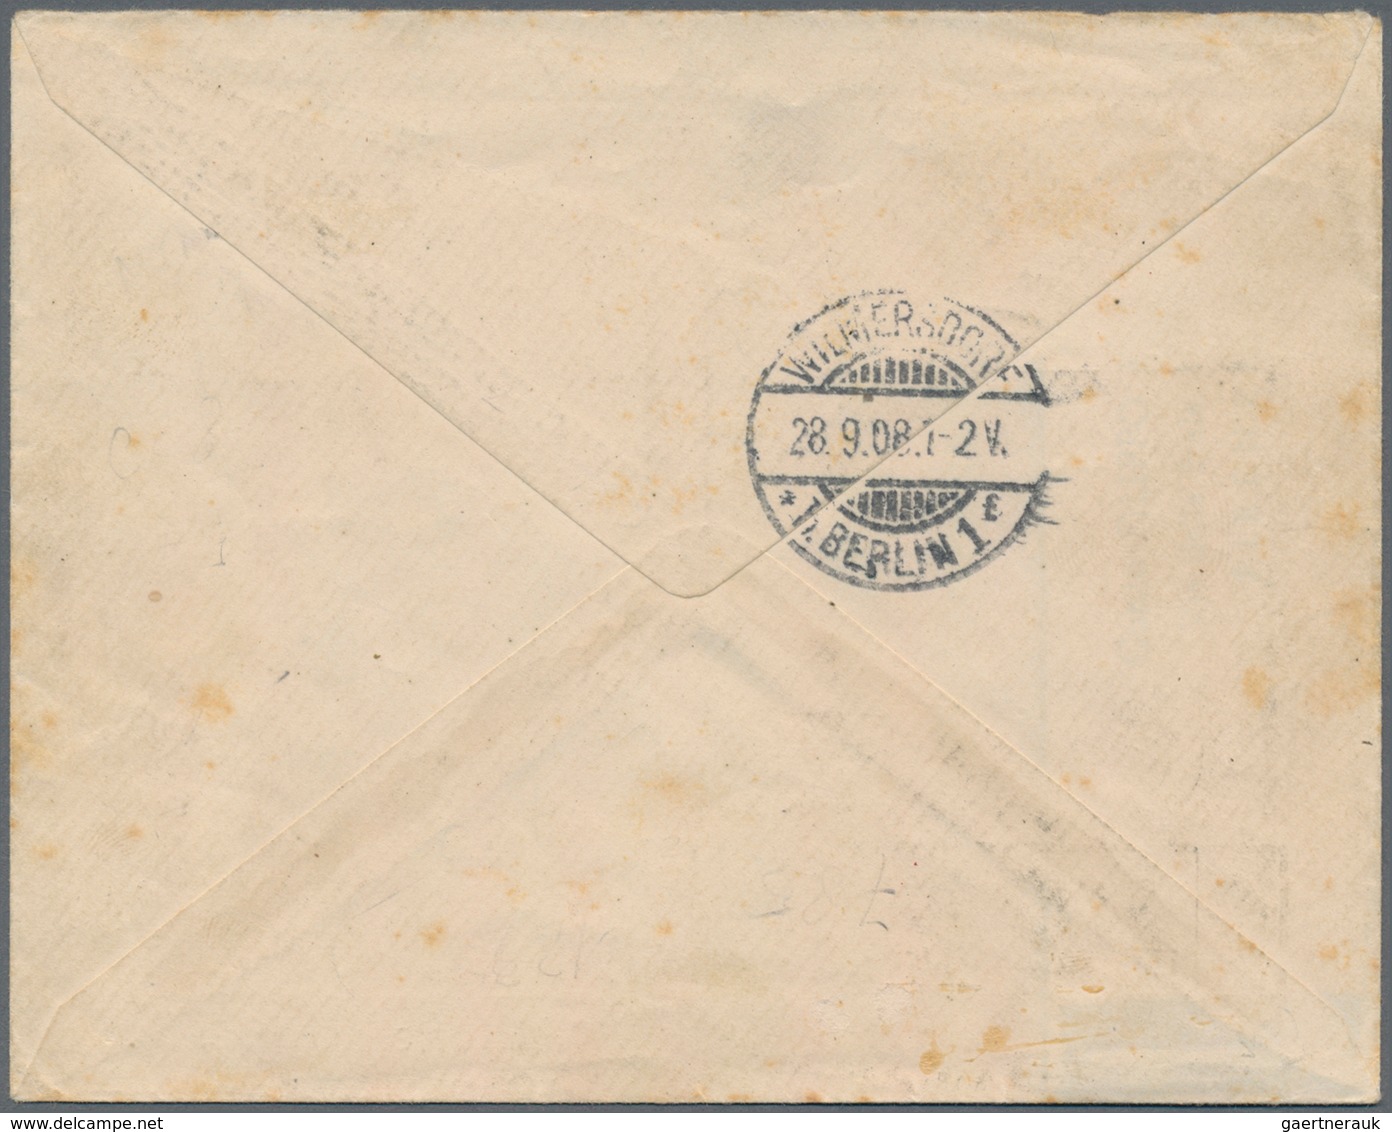 Italienische Post In Der Levante: 1908, Postage Stamp 20 PIA On 5 L On R Letter From Constantinople - Emissioni Generali